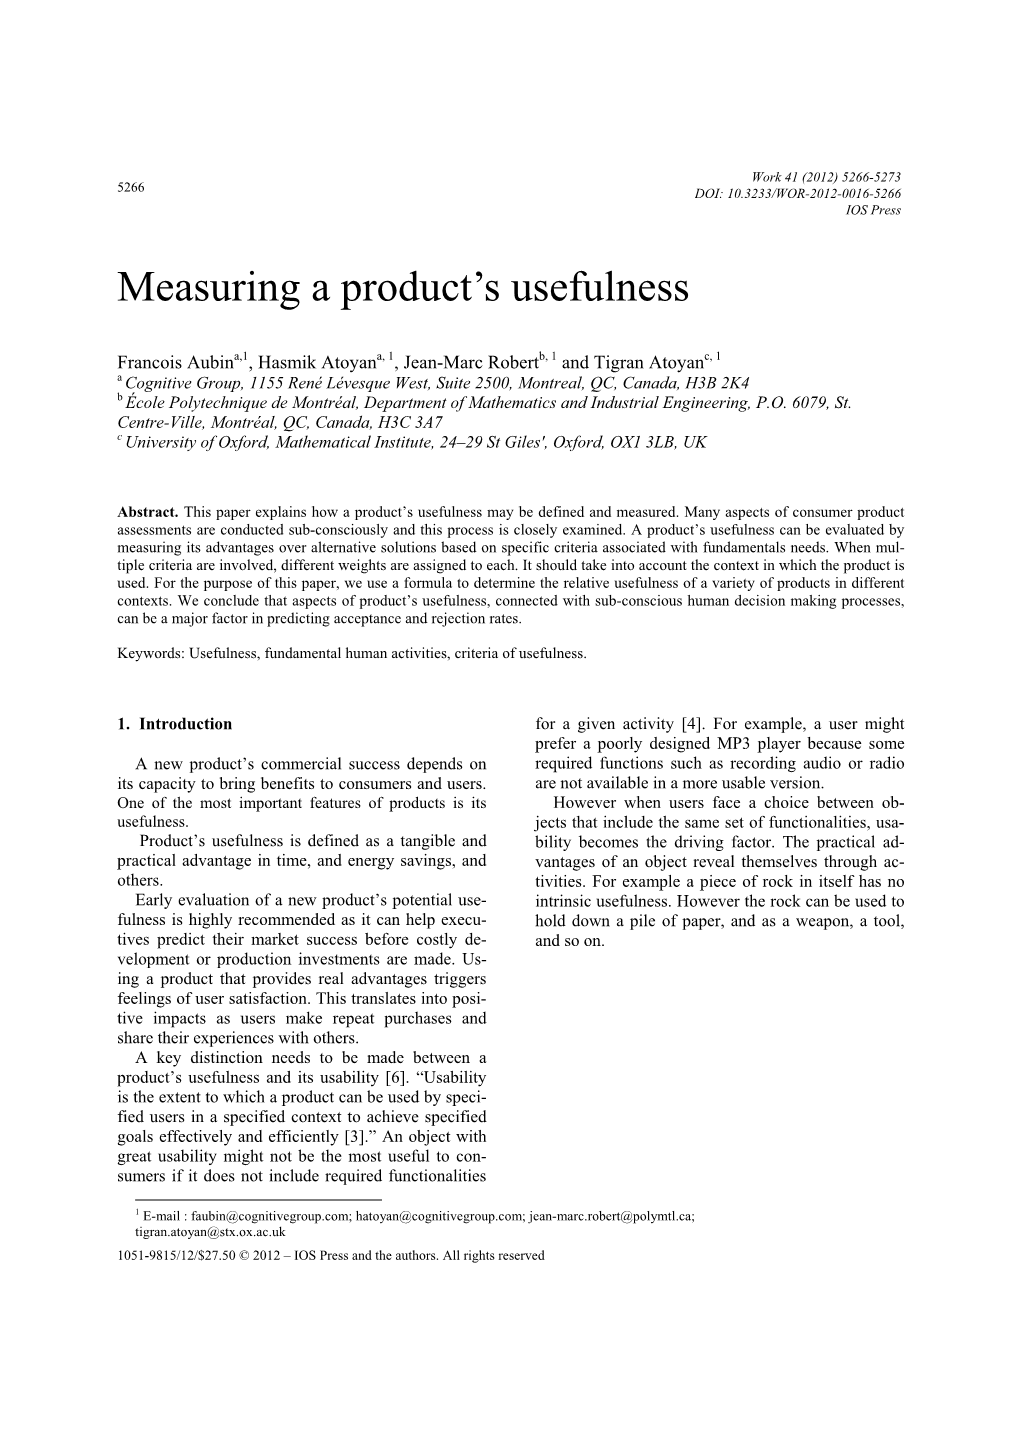 Measuring a Product's Usefulness